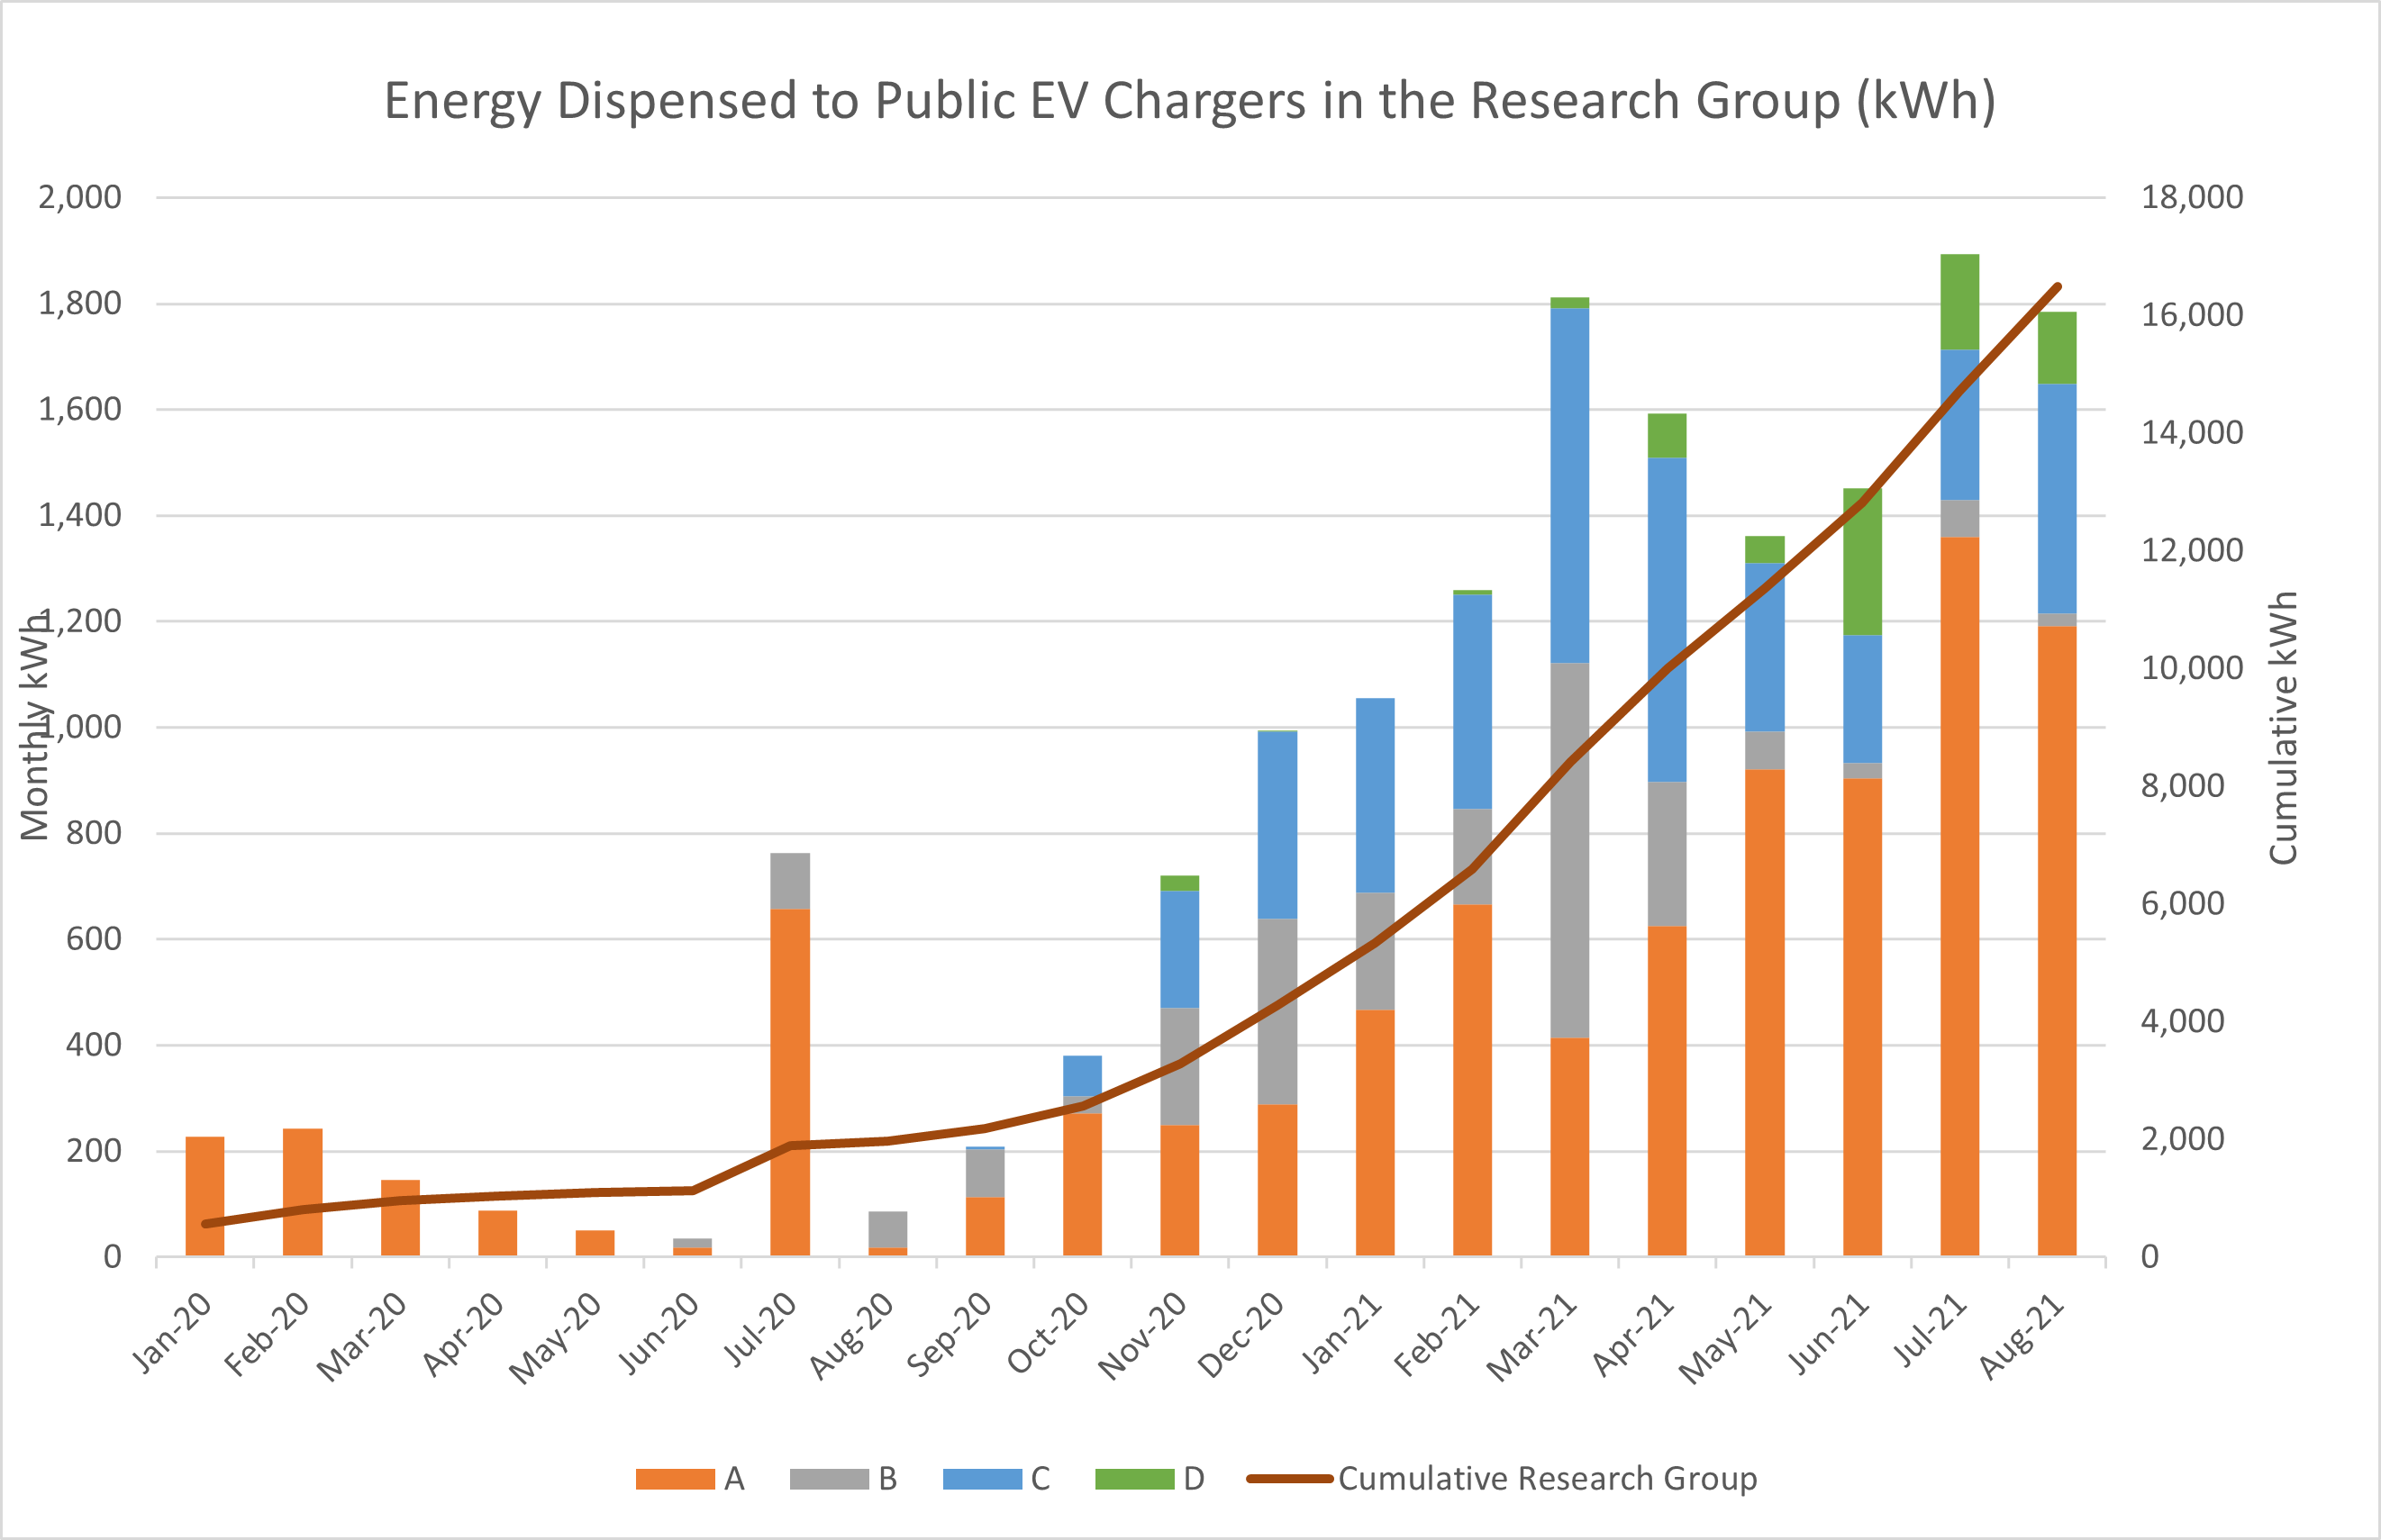 Energy Dispensed to Public EV Chargers in the Research Group (kWh)